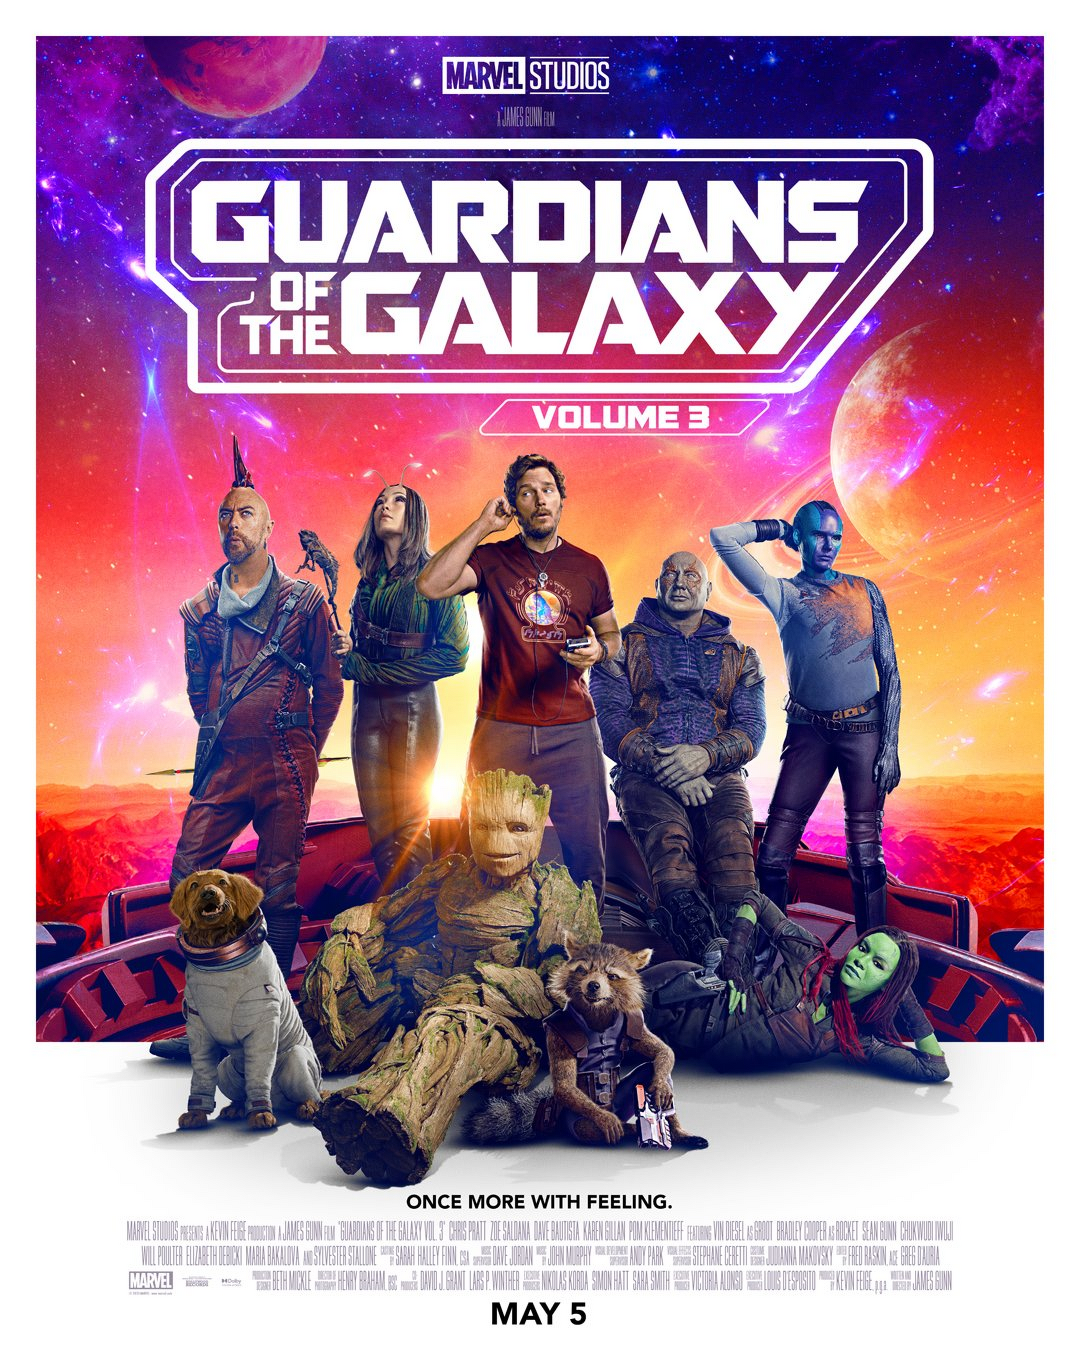 https://static.wikia.nocookie.net/soundeffects/images/8/86/Guardians_of_the_Galaxy_Vol._3.png/revision/latest/scale-to-width-down/1080?cb=20230806181210